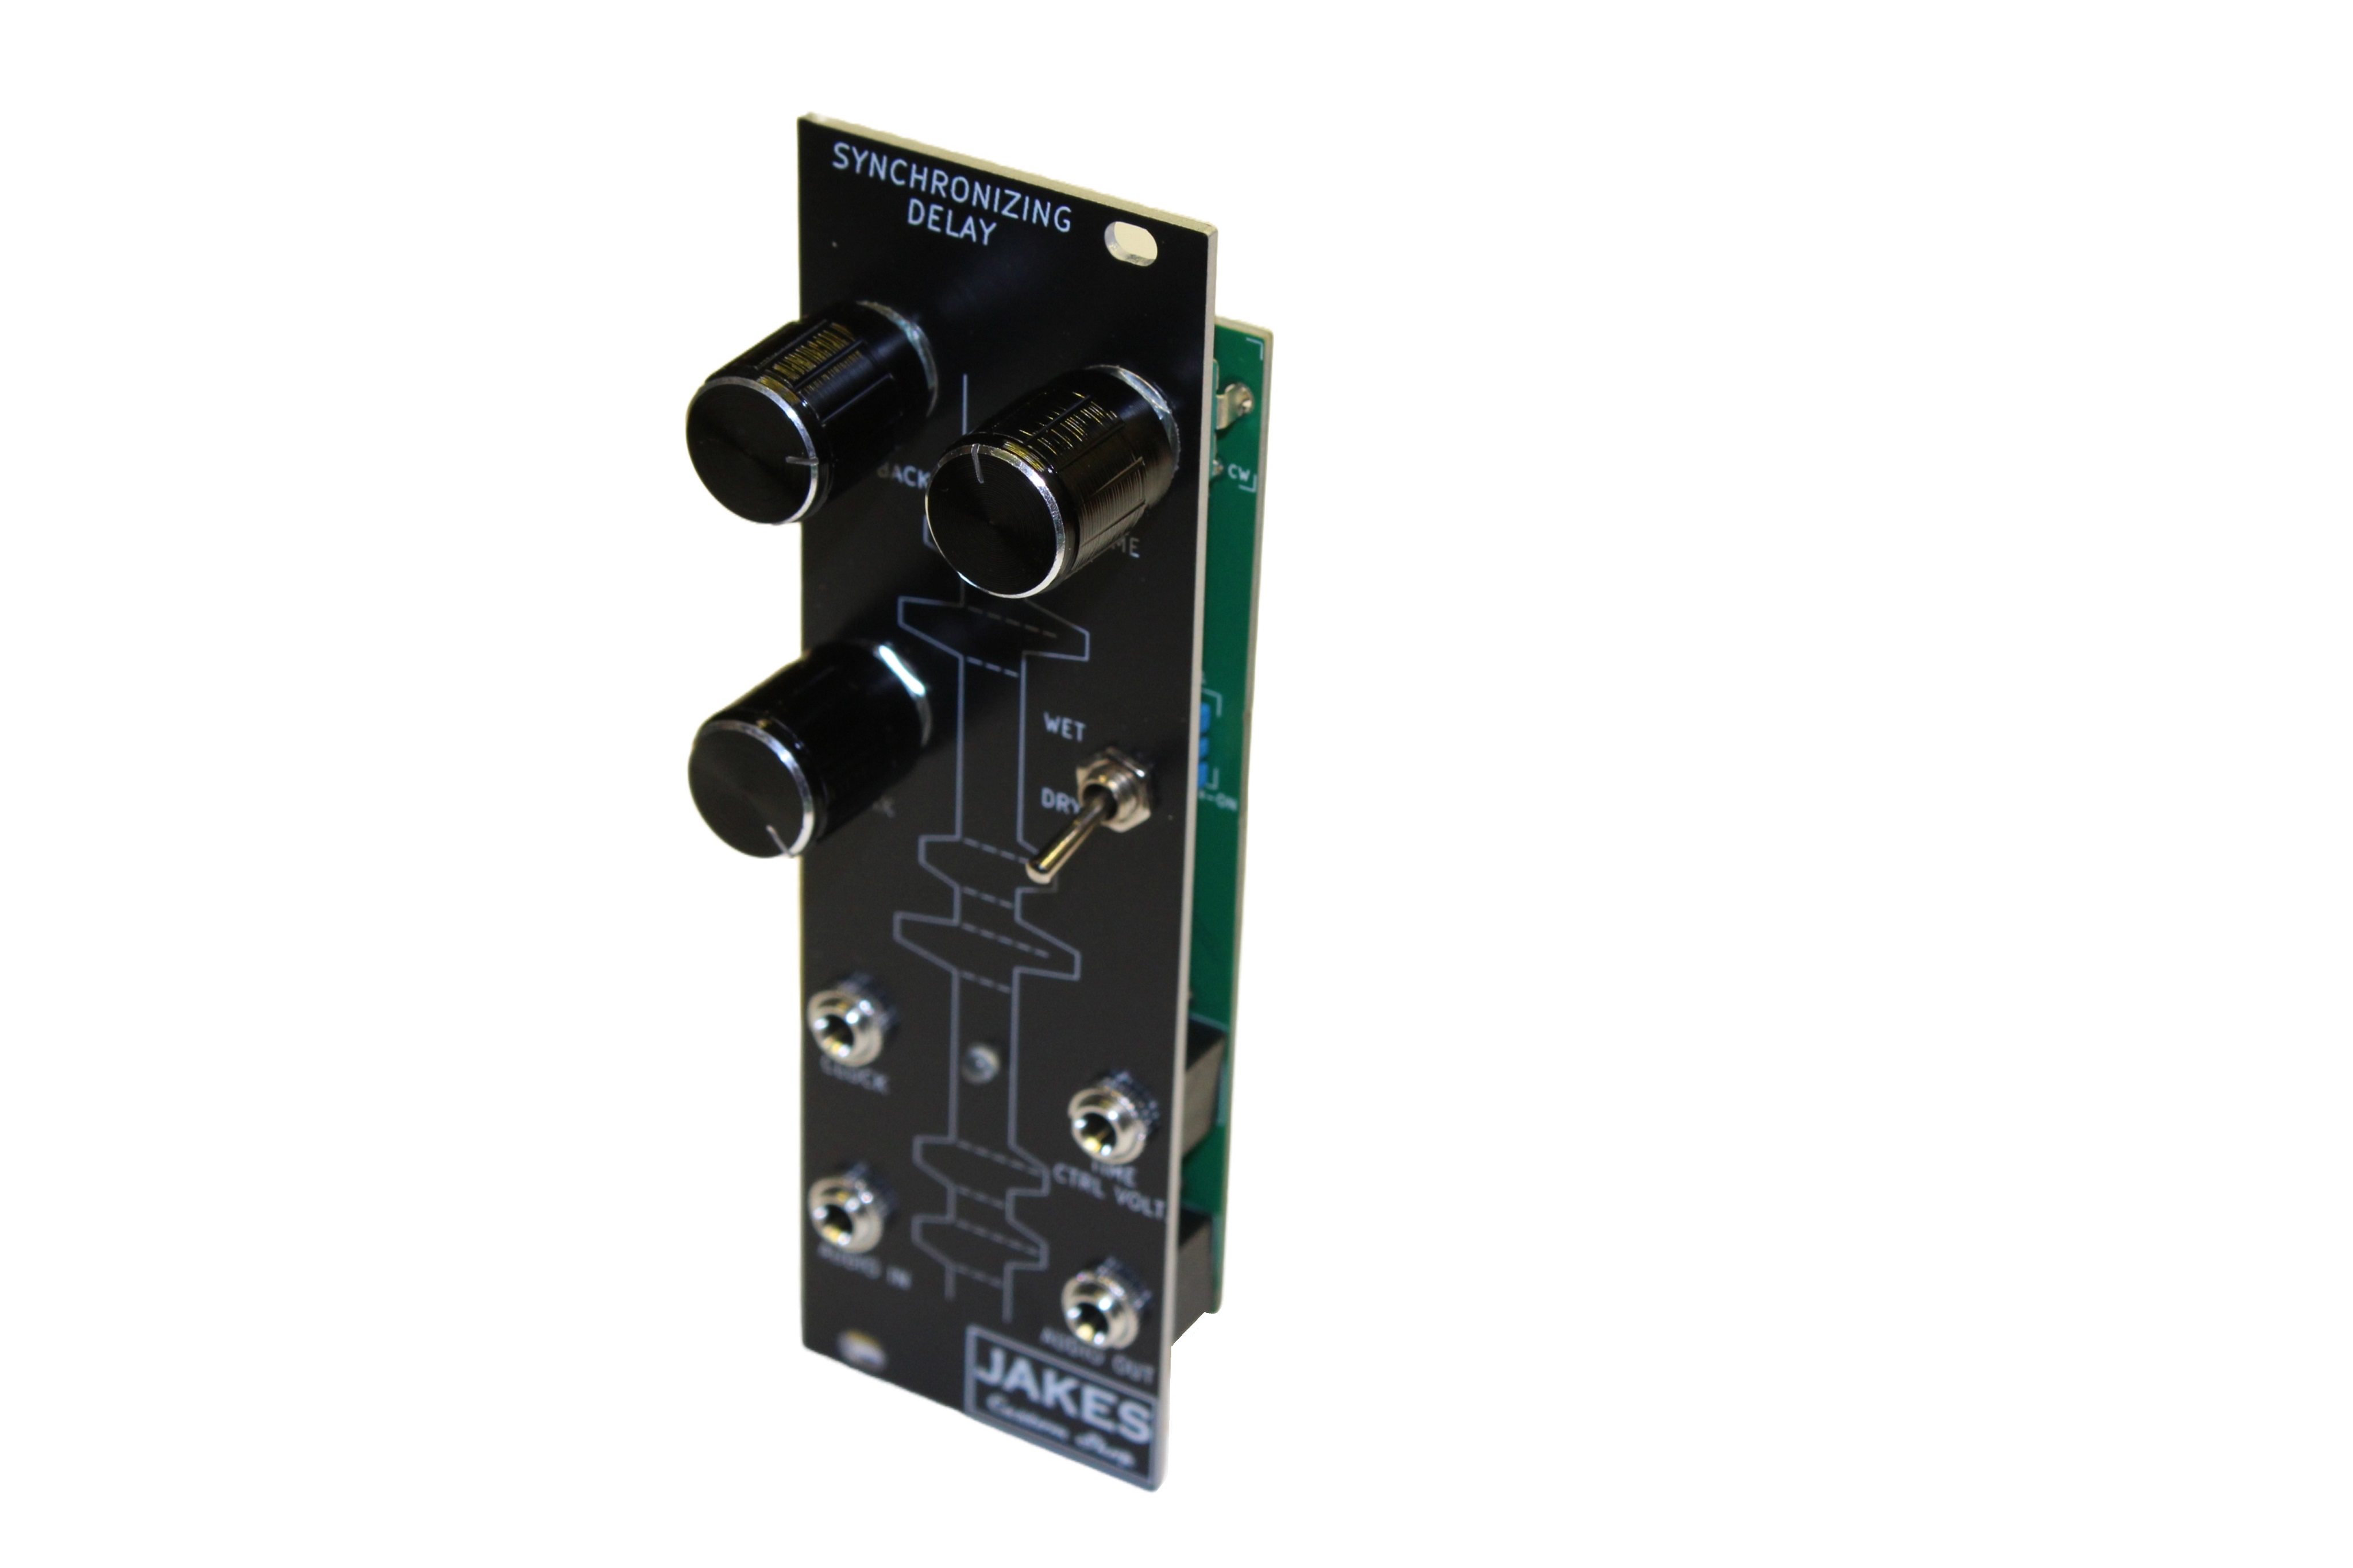 Front panel layout of the Syncronizing Delay Eurorack Module